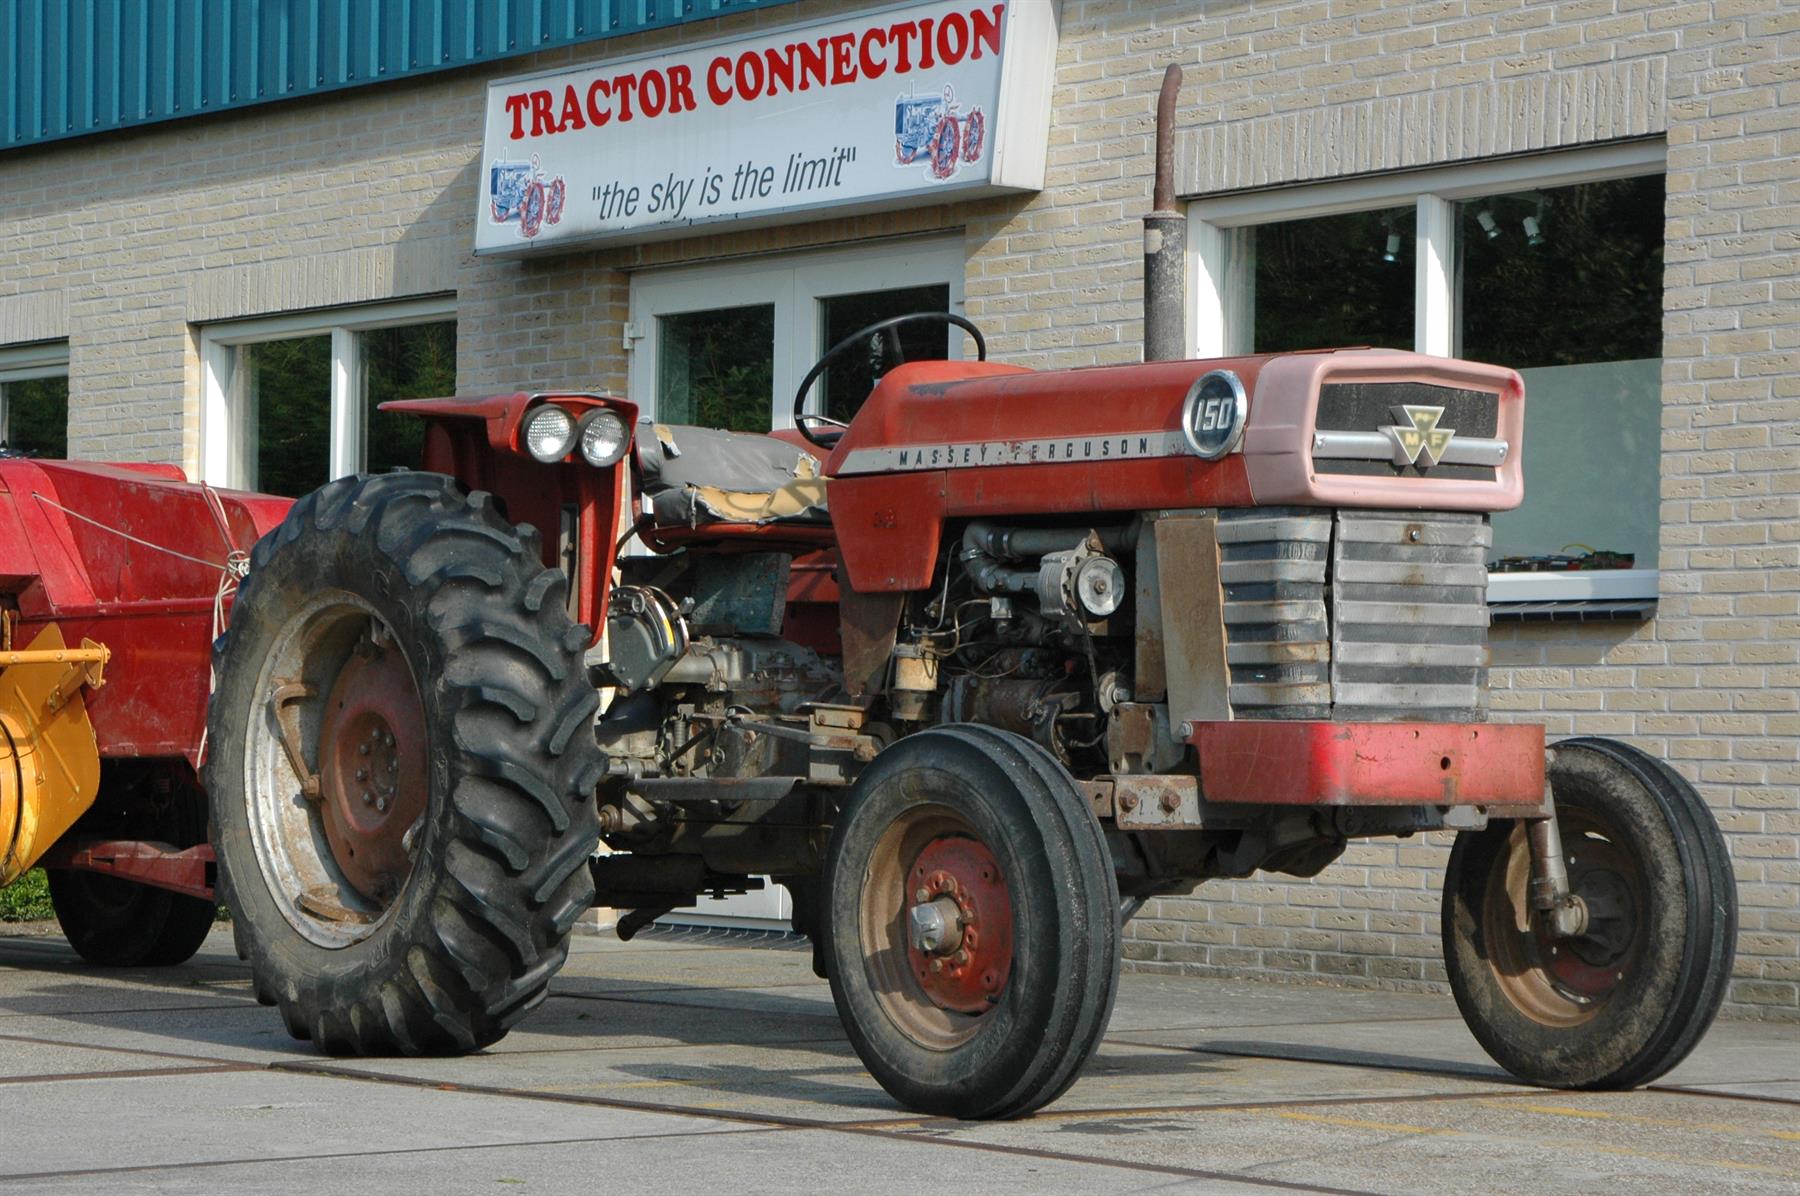 Tractor Connection